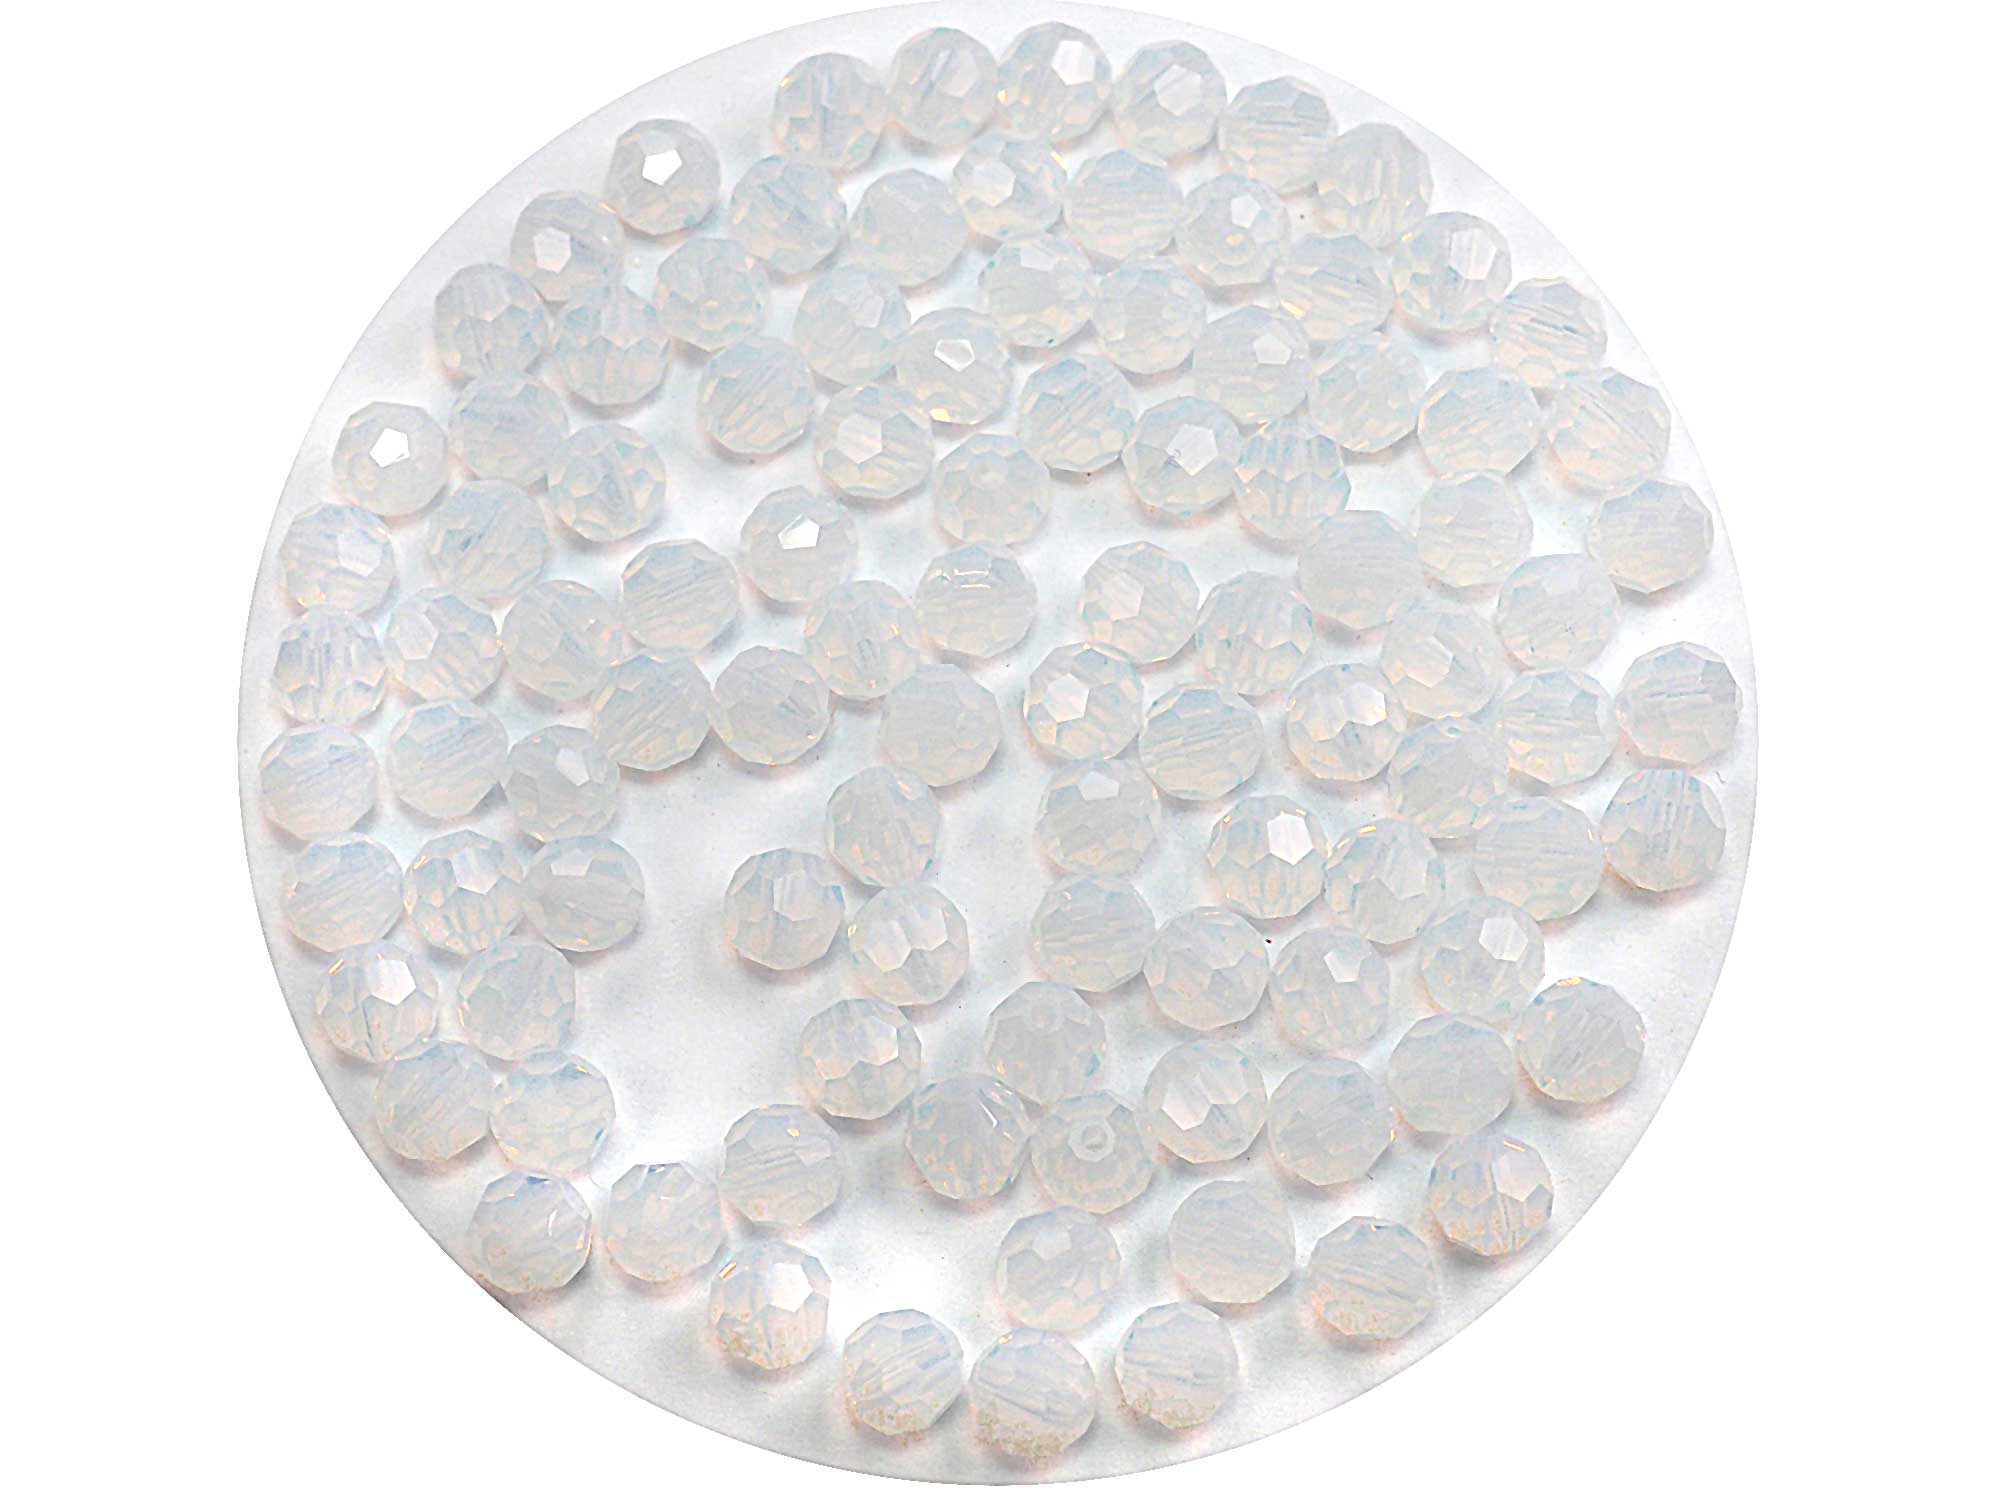 White Opal milky Czech Machine Cut Round Crystal Beads 8mm Rosary Size Faceted Beads